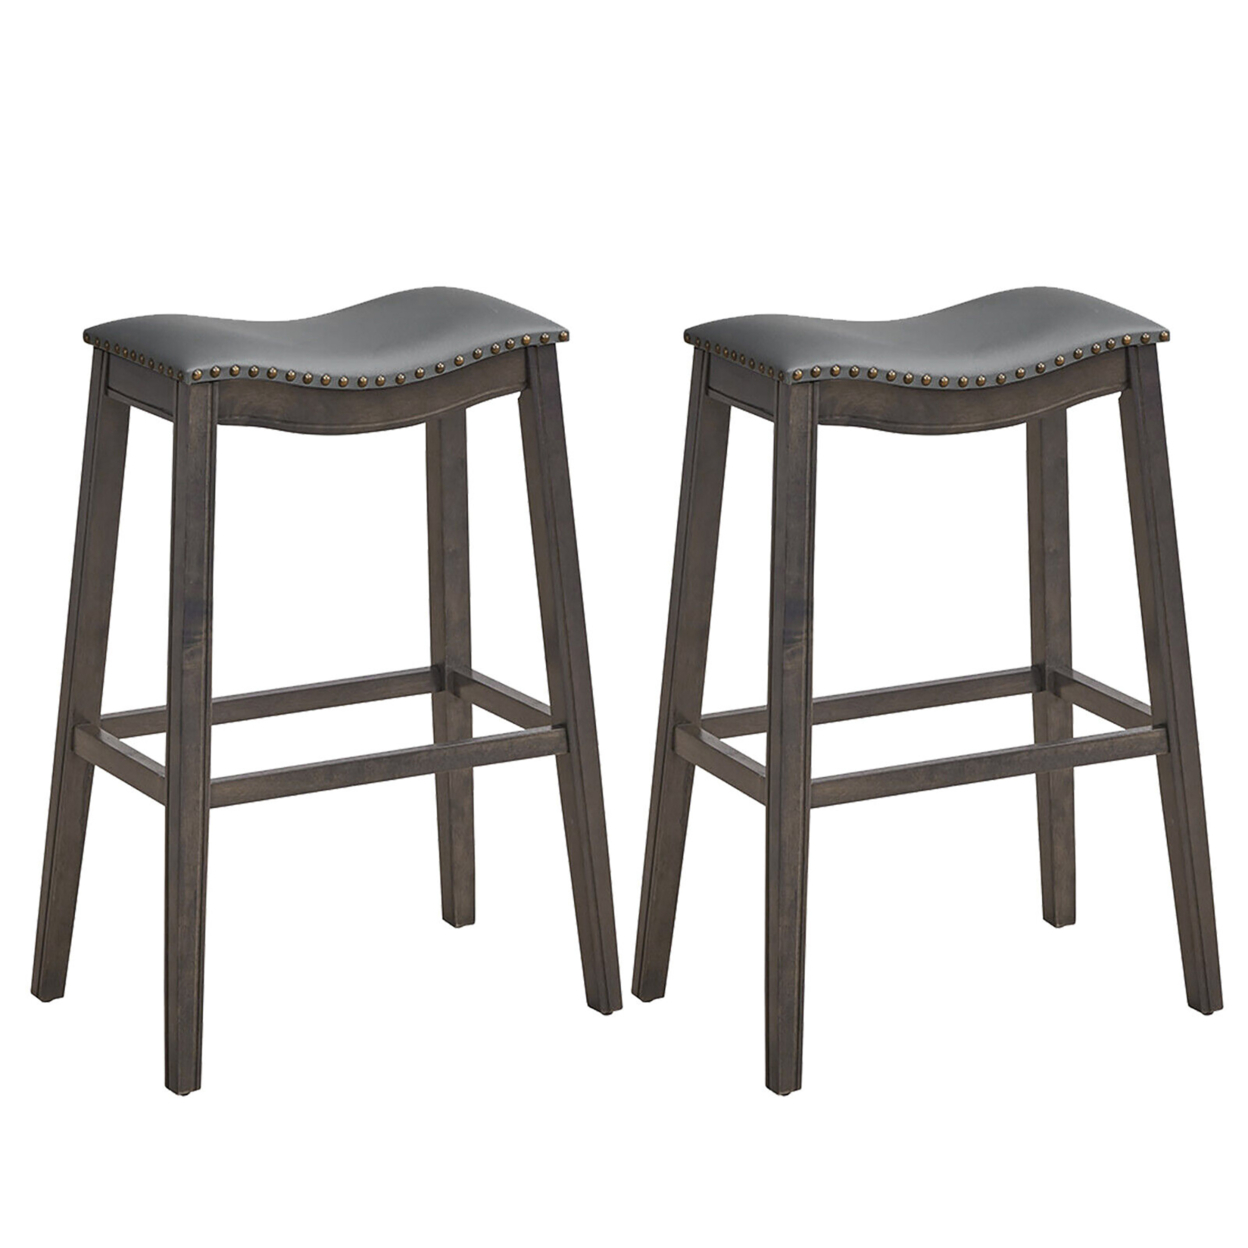 Set Of 2 Saddle Bar Stools Bar Height Kitchen Chairs W/ Rubber Wood Legs - Brown